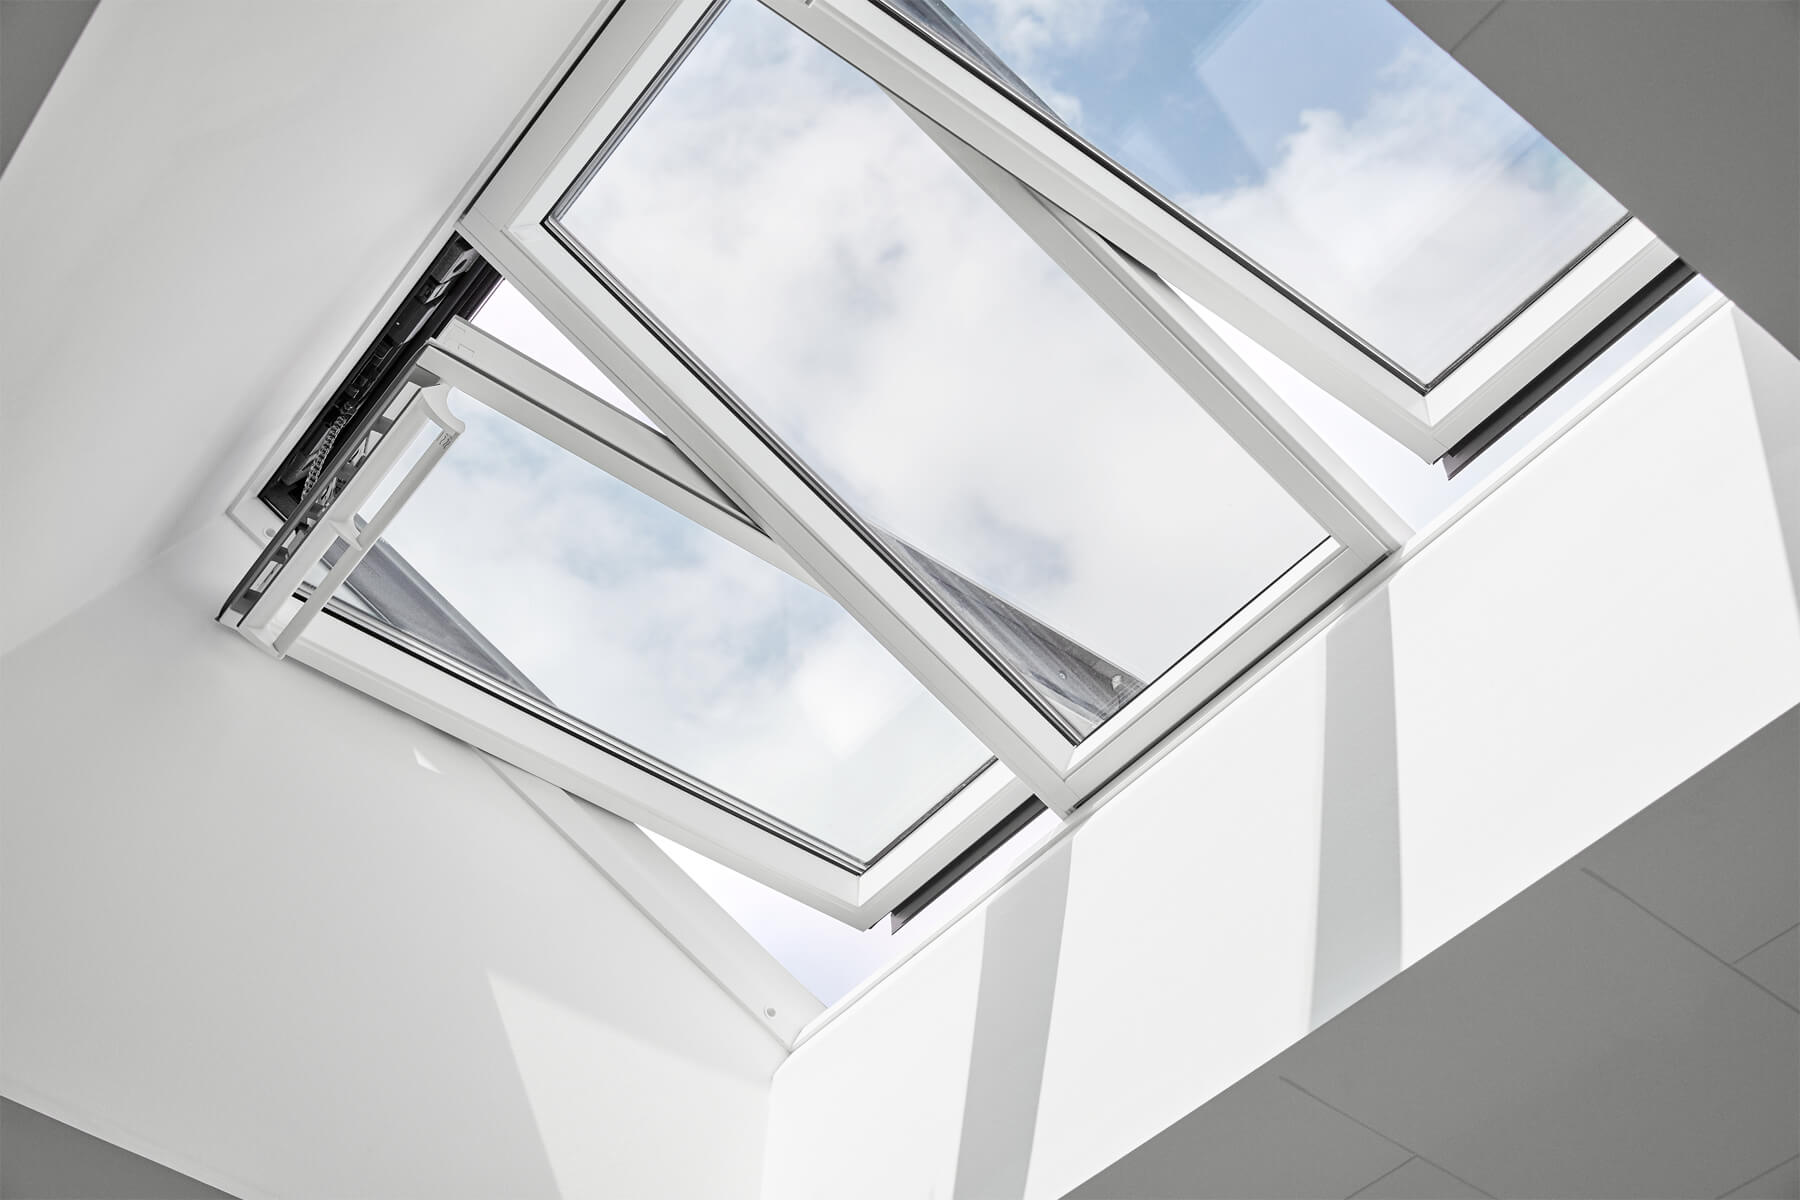 The image shows an open Velux skylight window set in a white ceiling with a view of a blue sky with clouds.